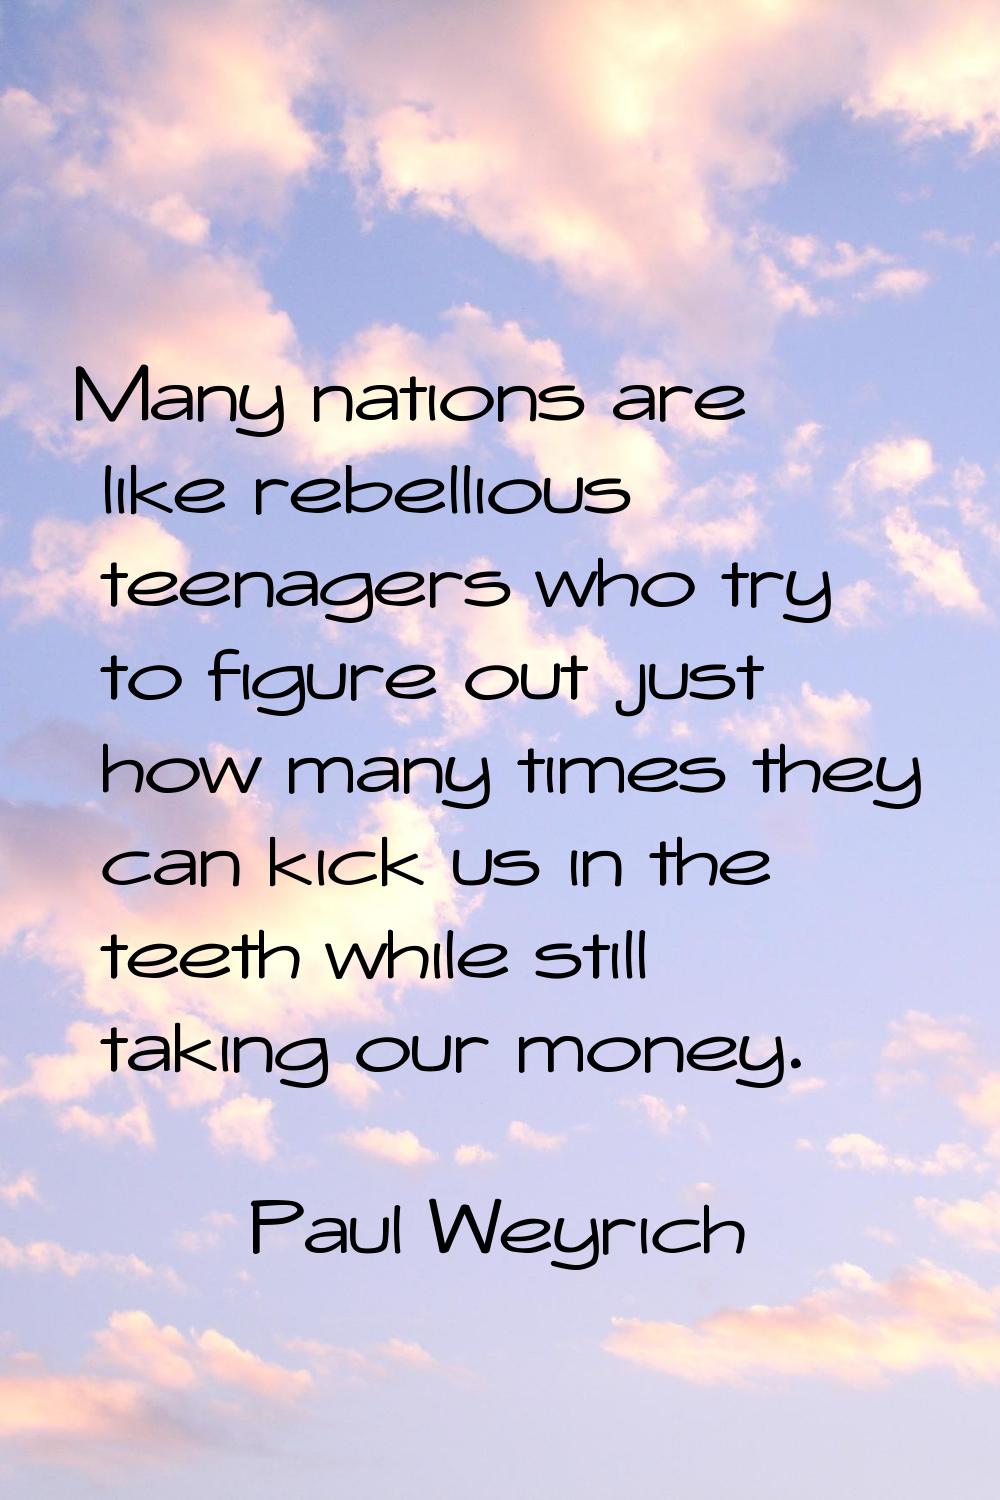 Many nations are like rebellious teenagers who try to figure out just how many times they can kick 